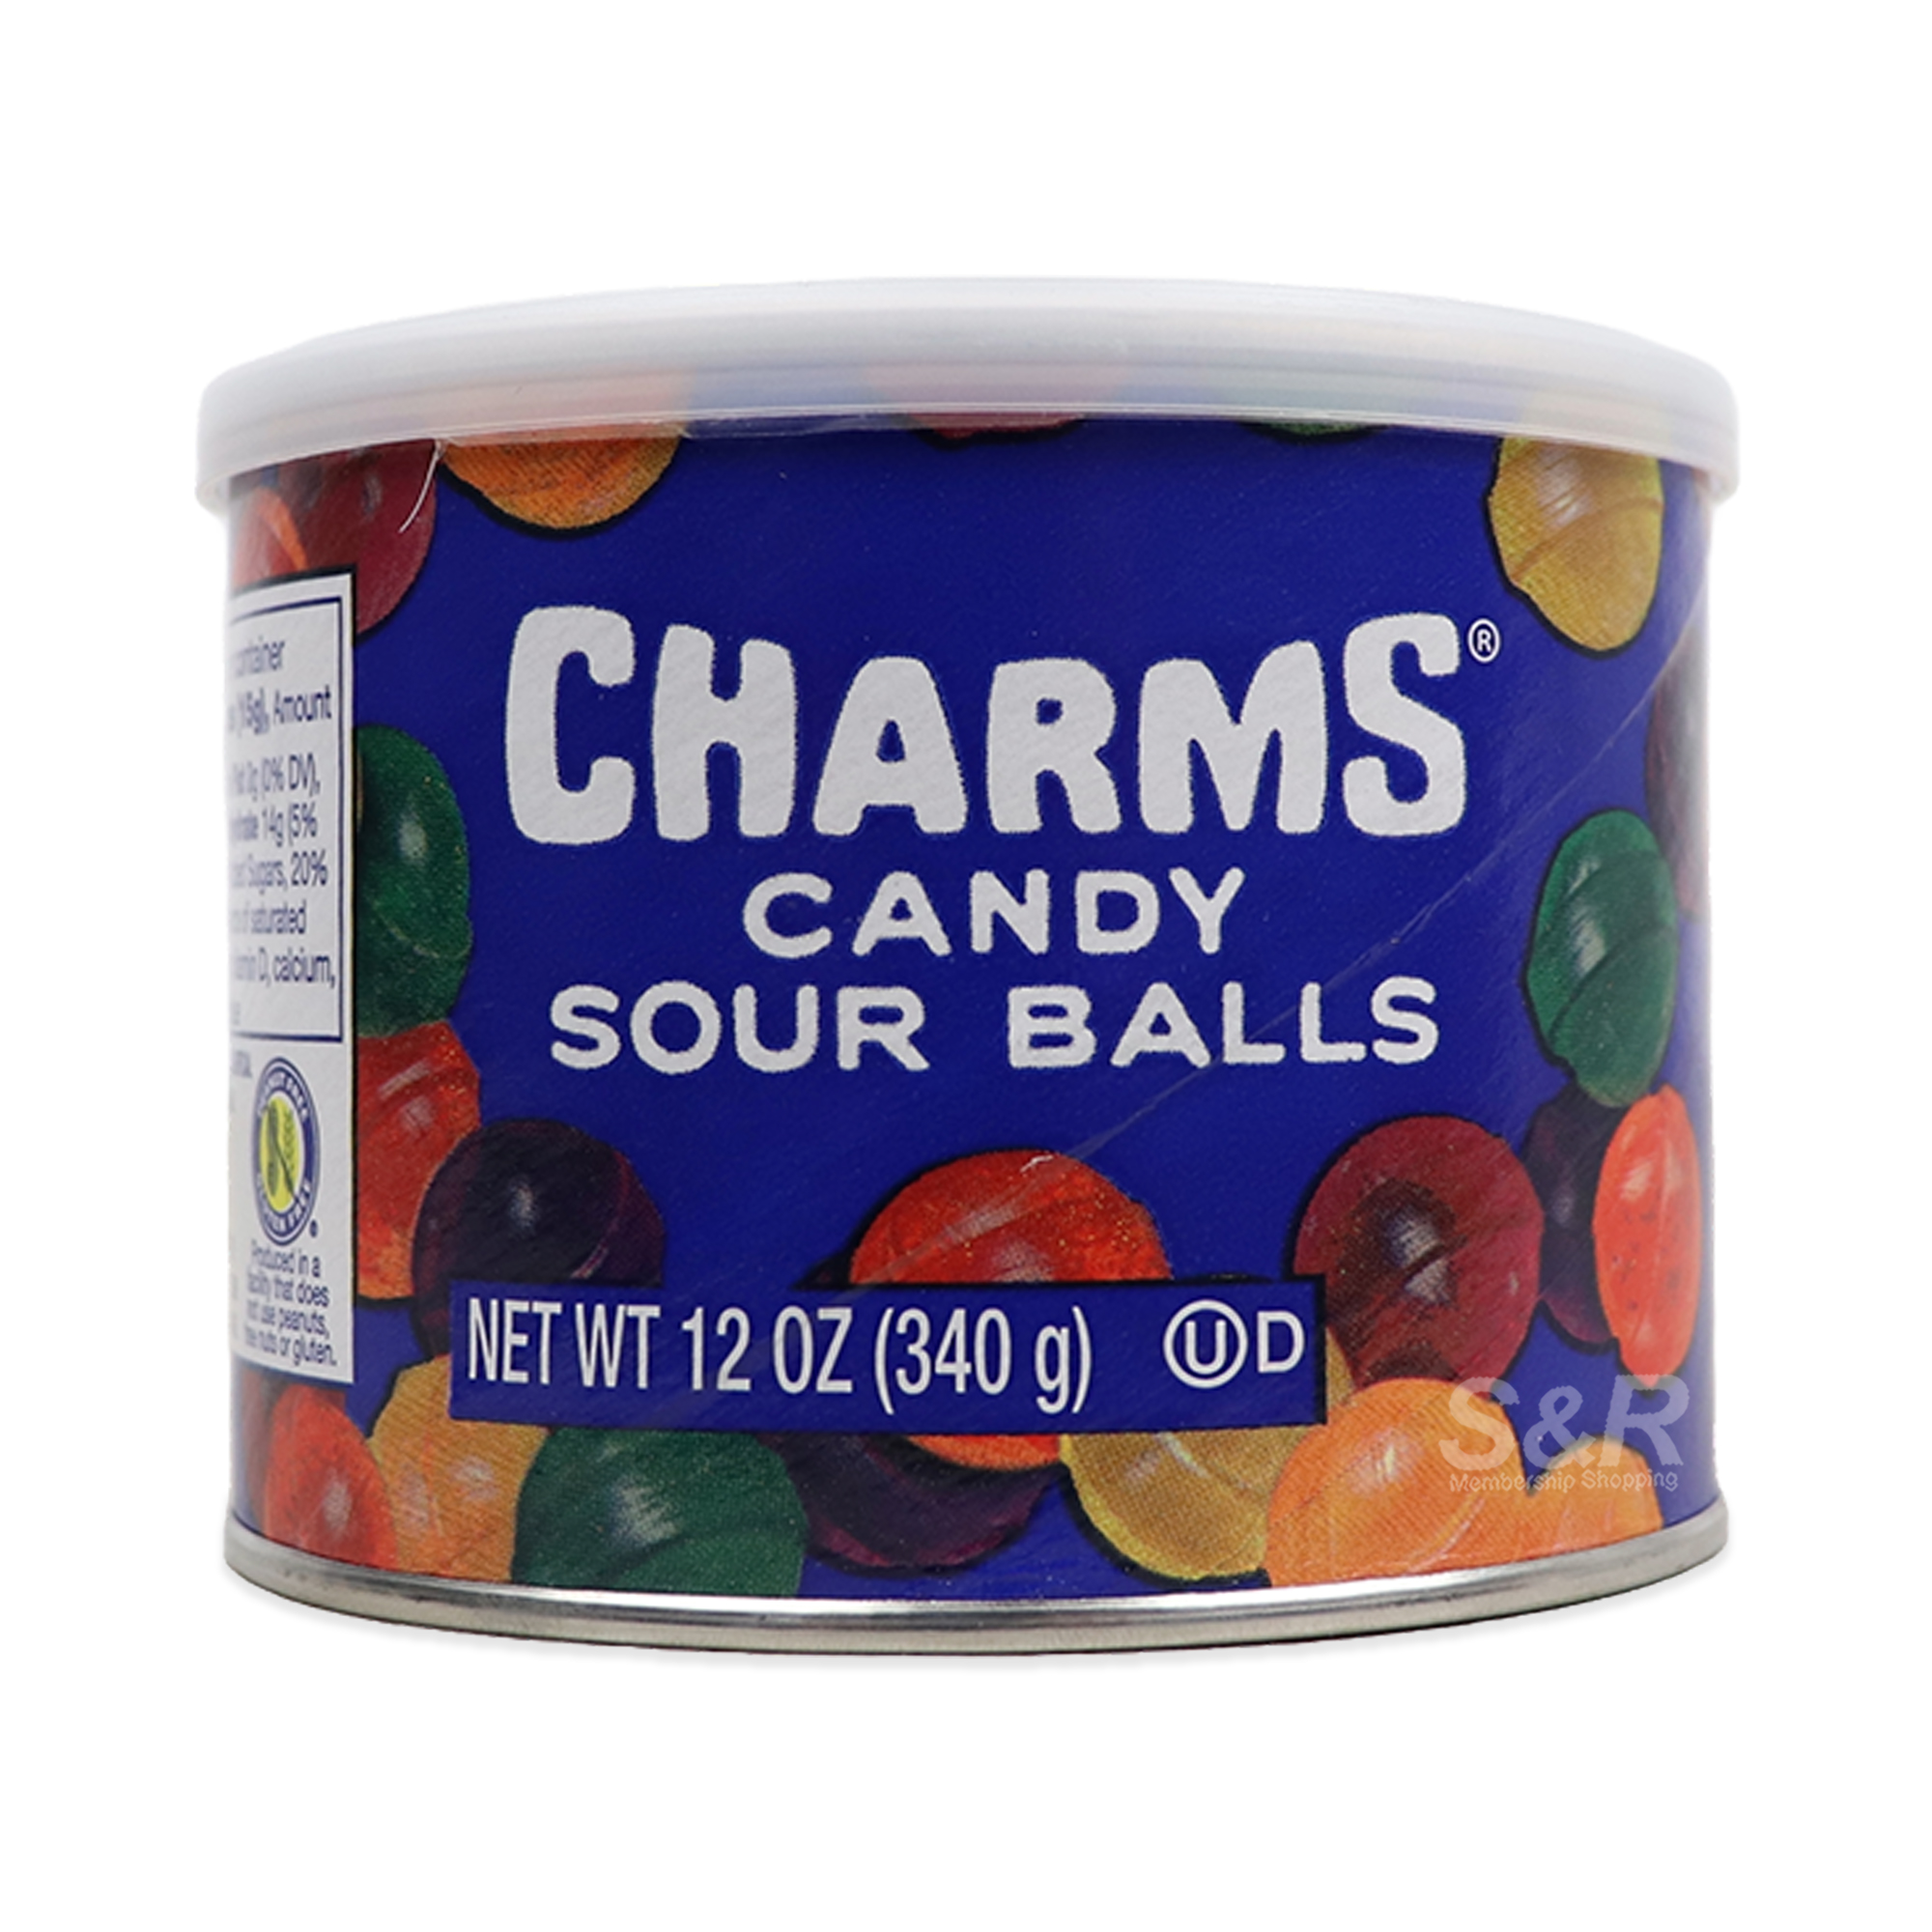 Charms Sour Balls Candy 340g